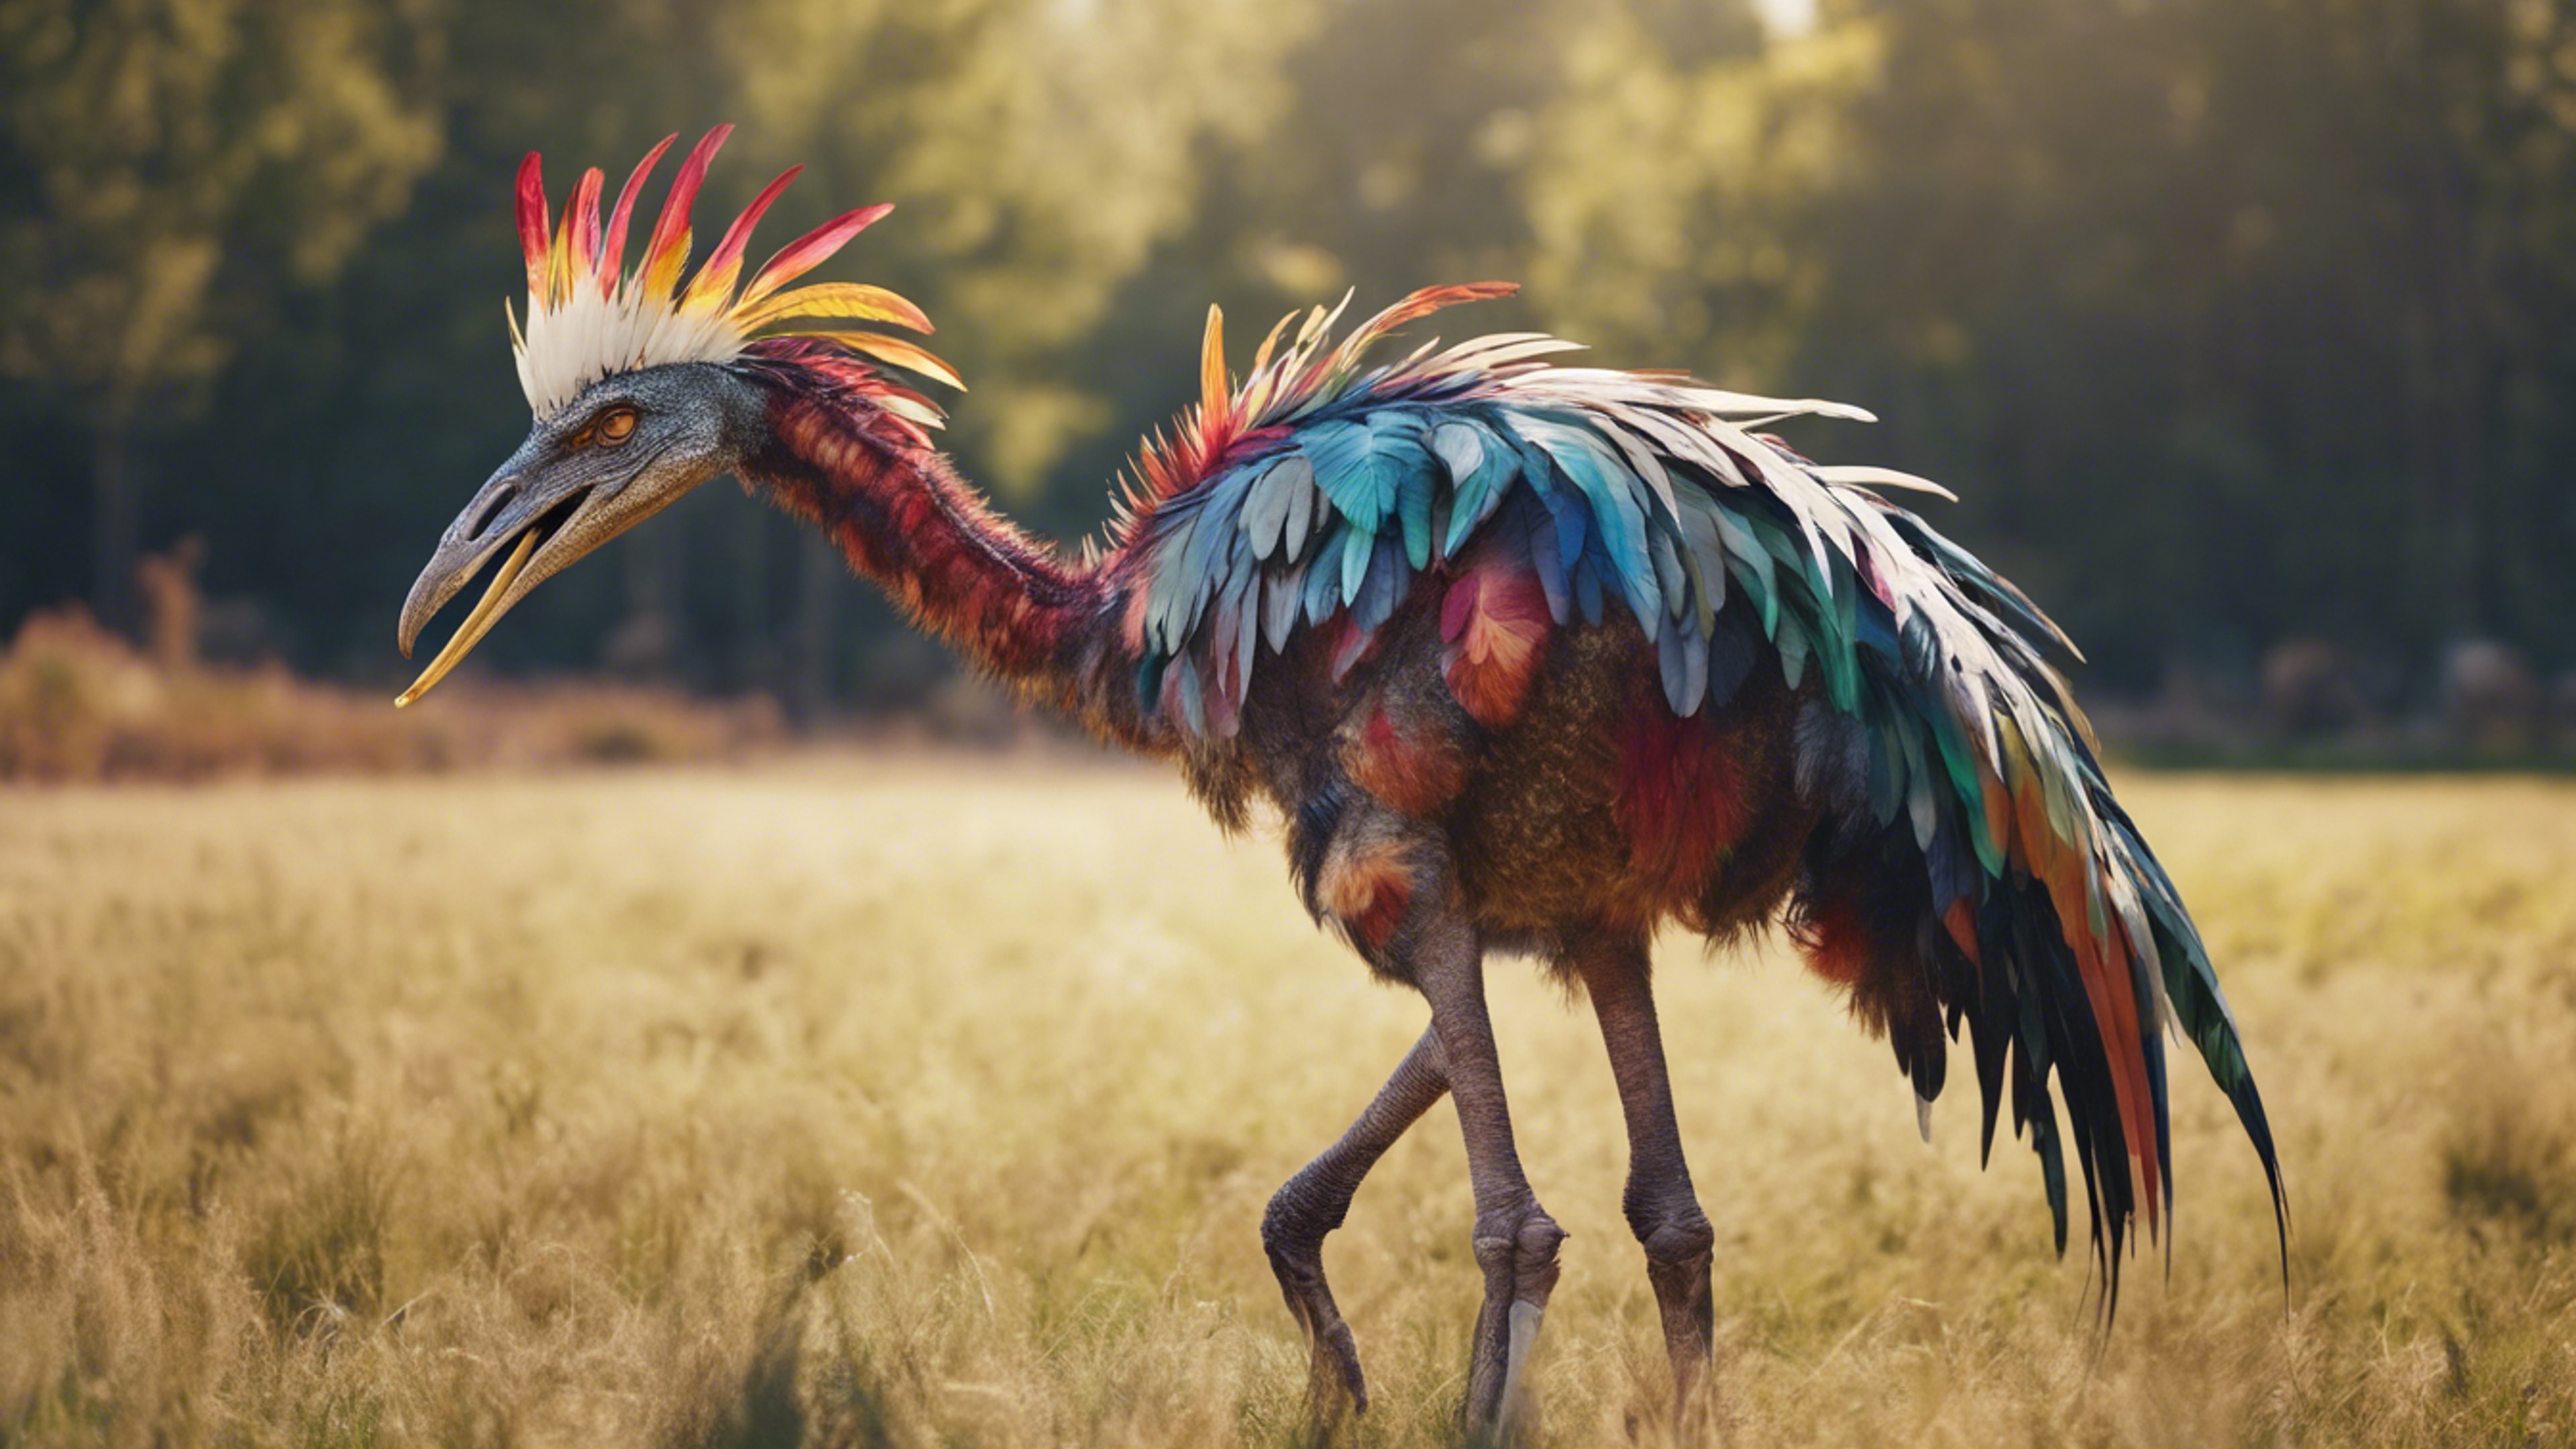 A Struthiomimus with colorful feathers prancing around in an open meadow. Tapeta[bbeb240df8e5485aba58]